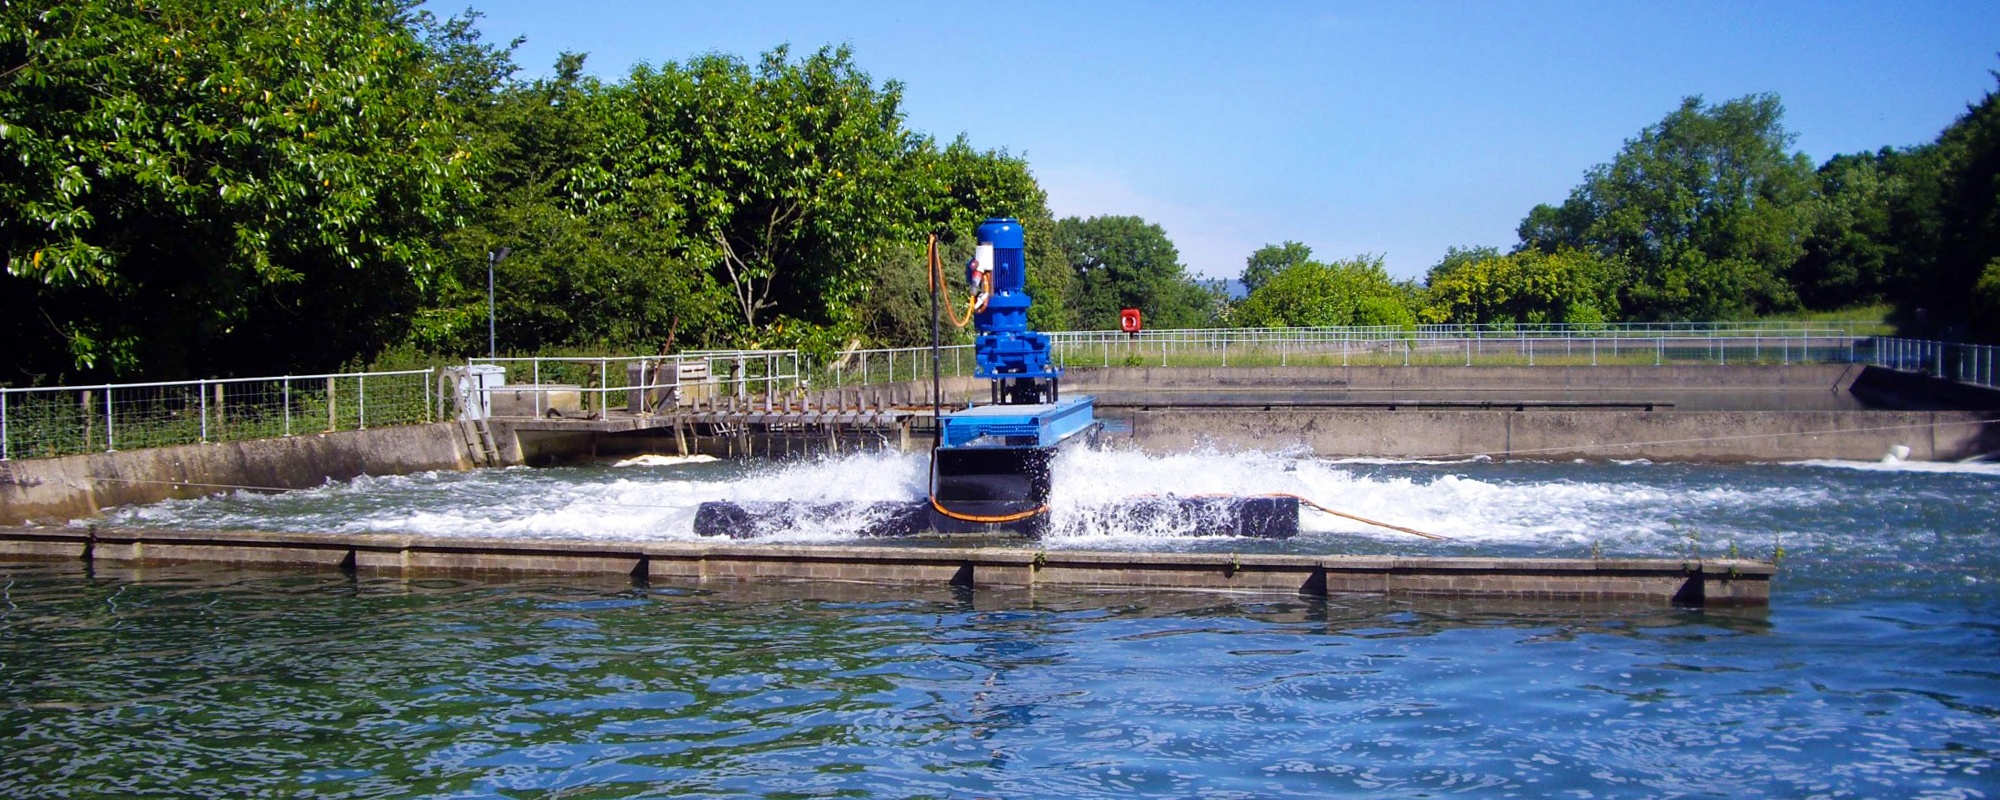 Clean water aeration for contaminant removal